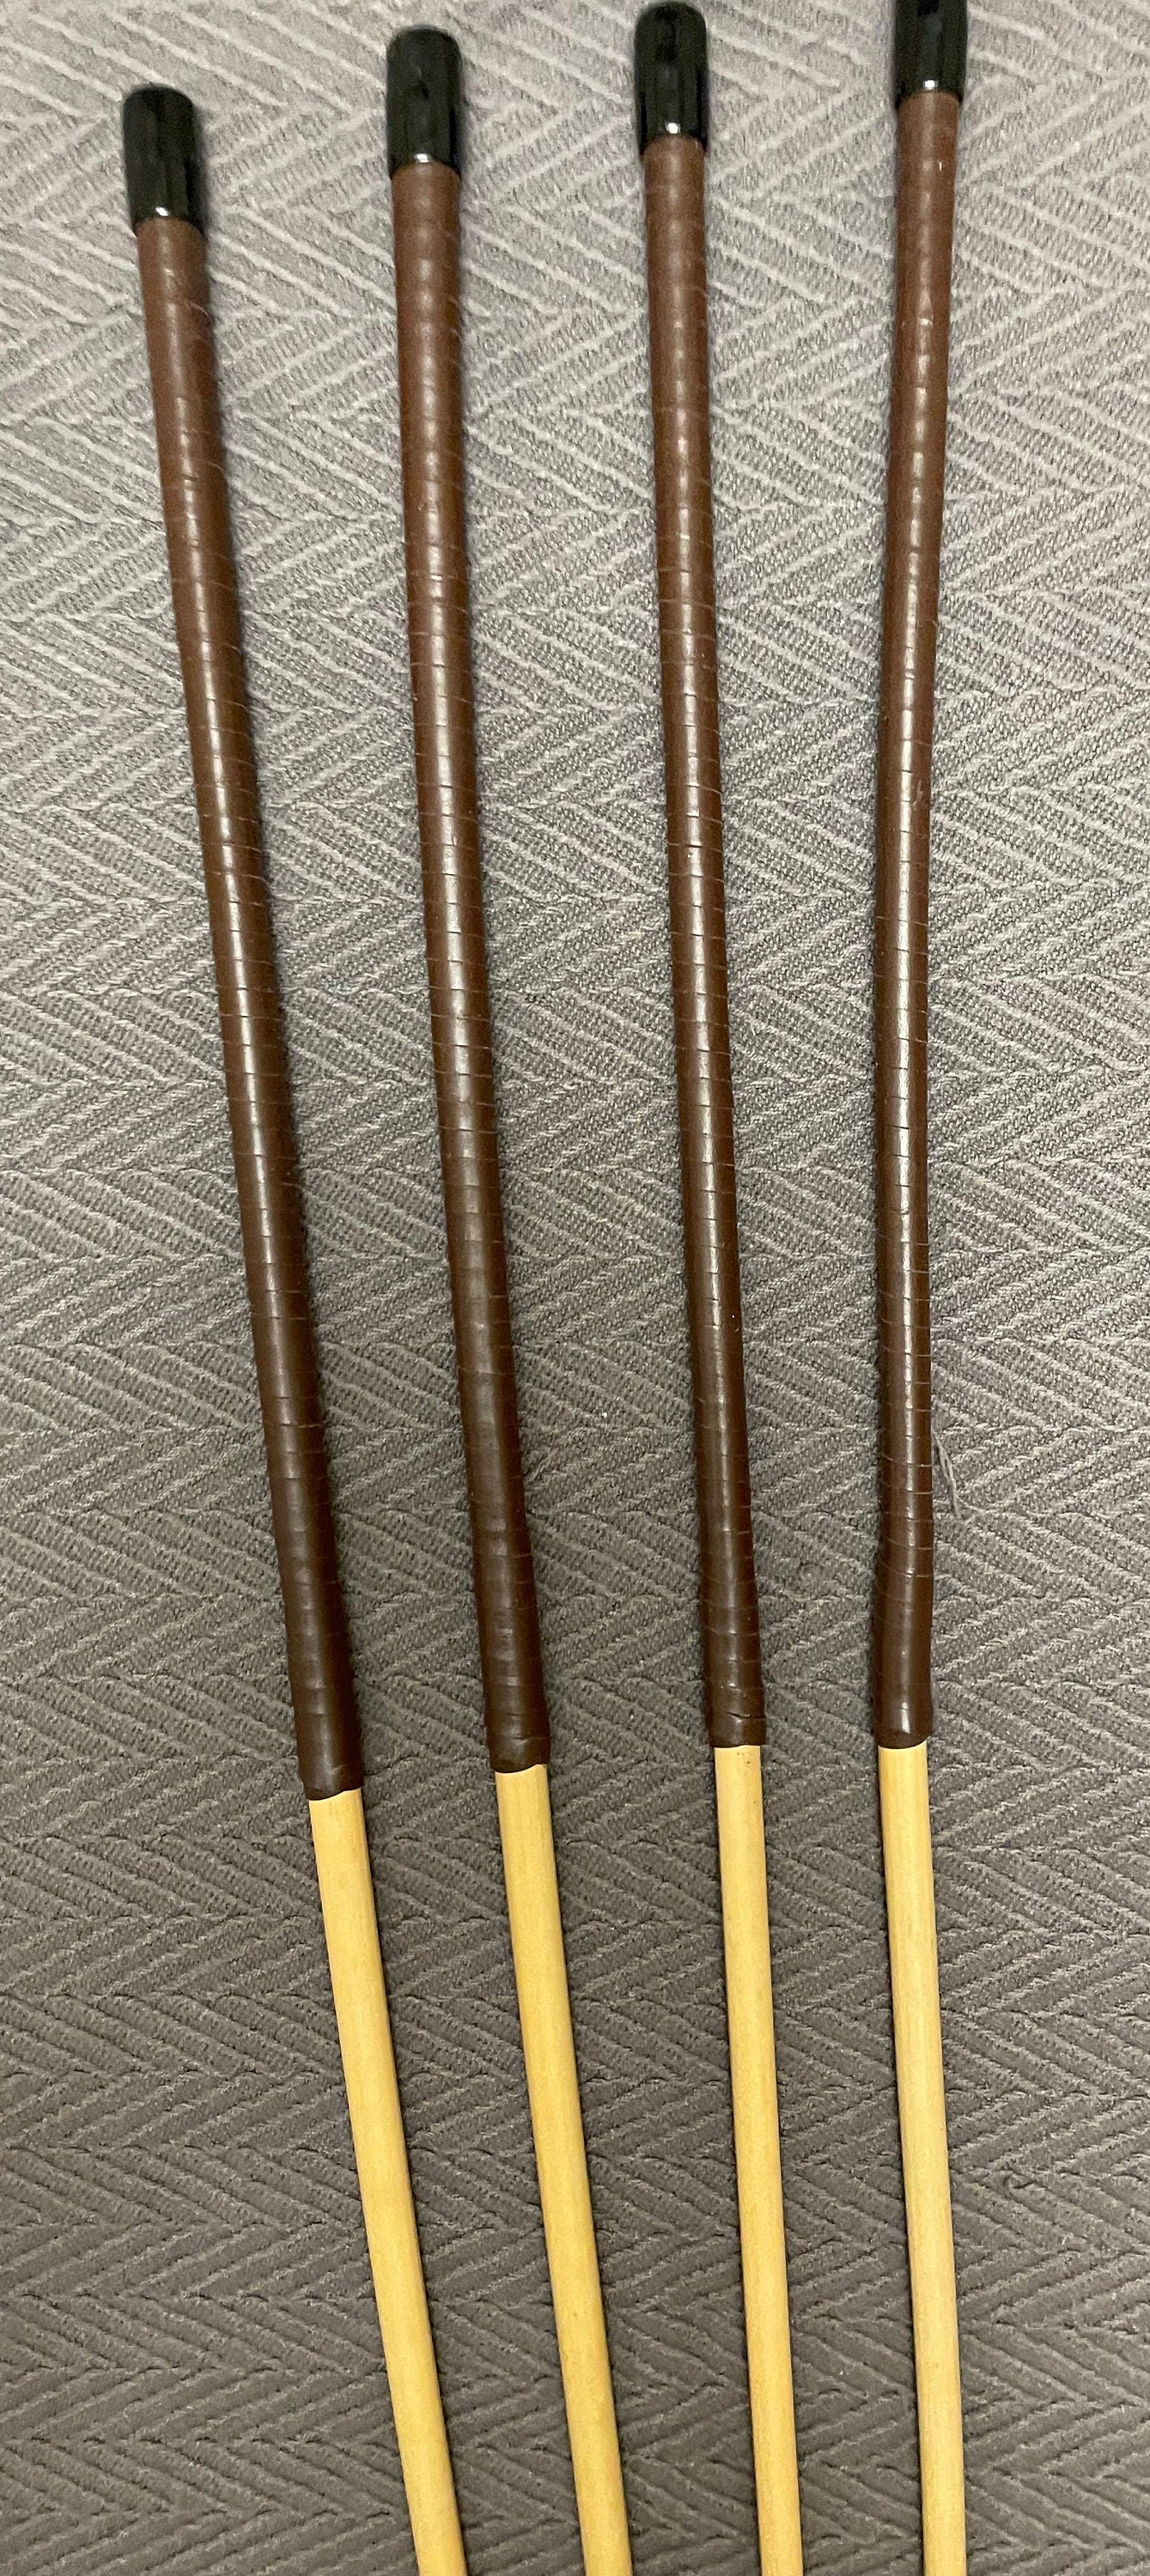 Knotless Dragon Canes / Ultimate Rattan Canes Set of 4 with Brandy Kangaroo Leather Handles 92 cms Length